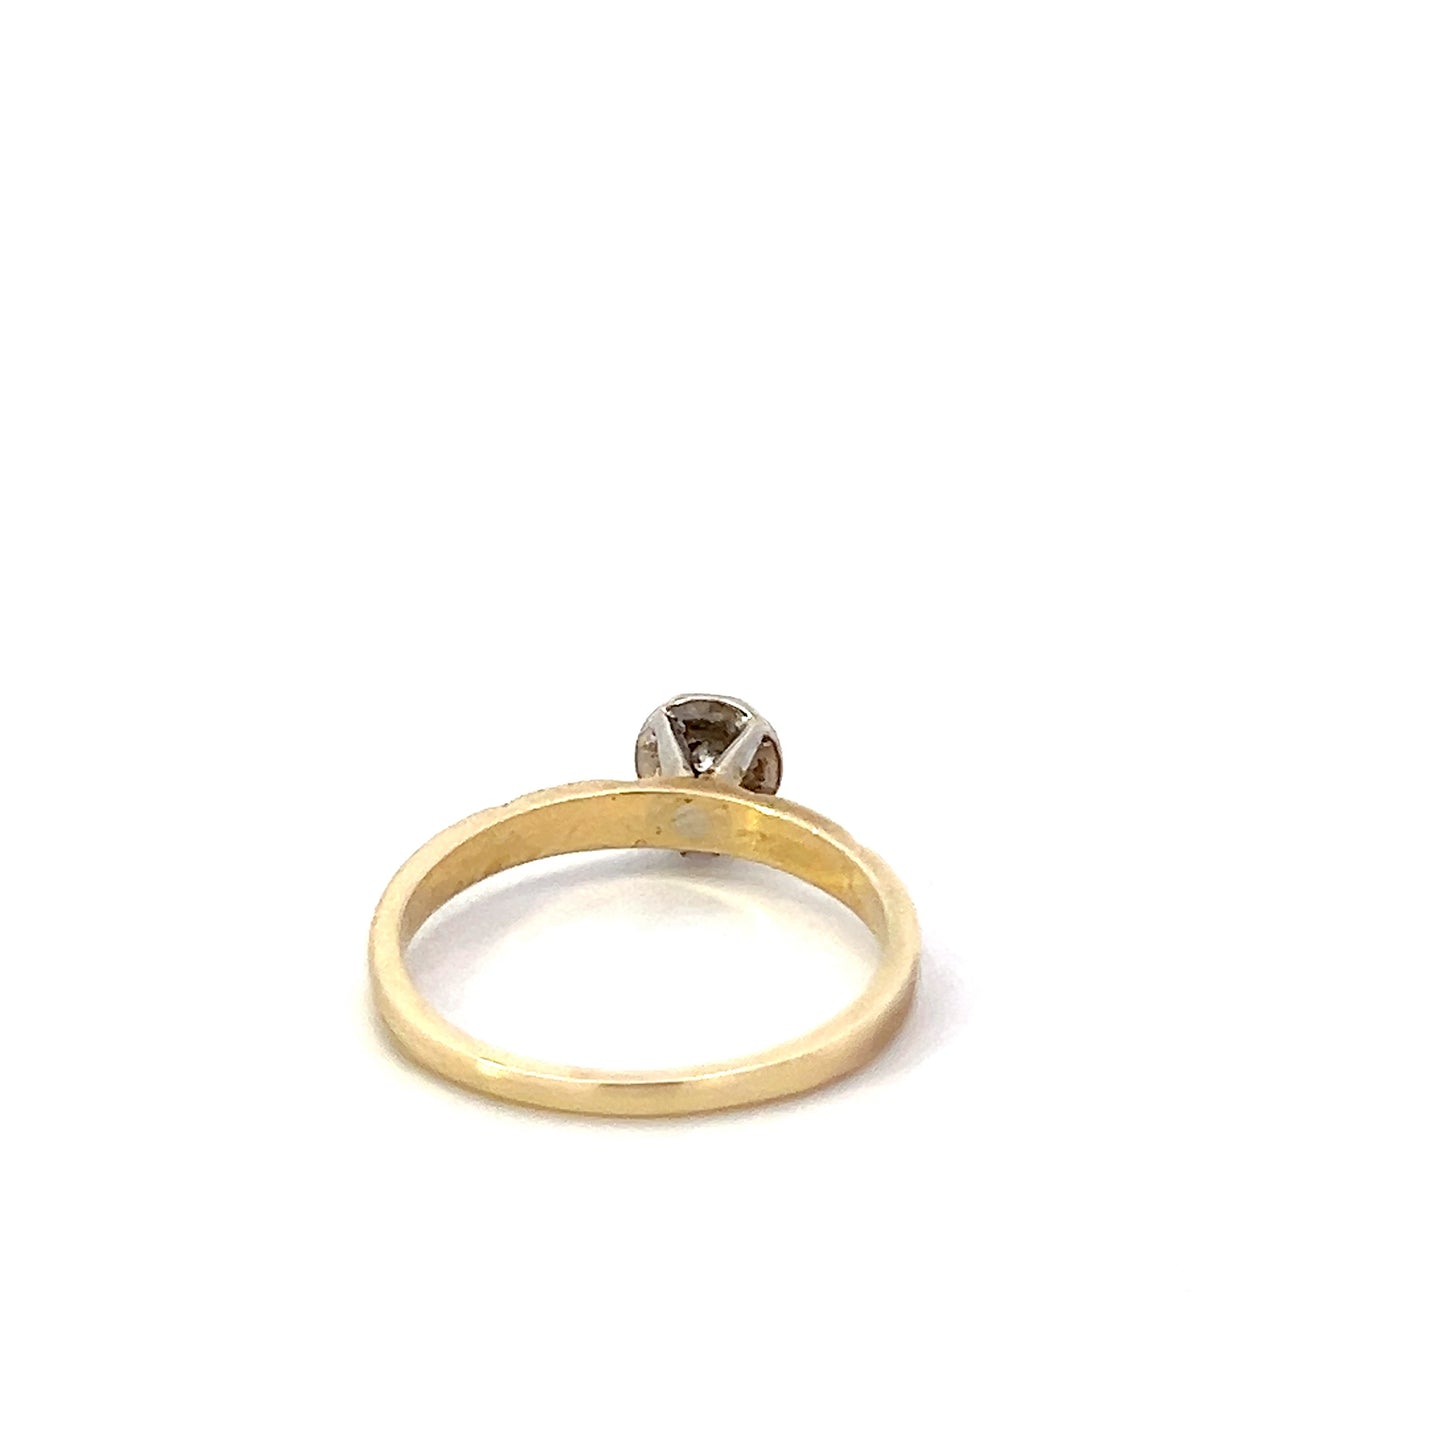 Vintage Diamond Solitaire Ring - 0.10ctw - 14k - Two-Tone Gold - Size 6